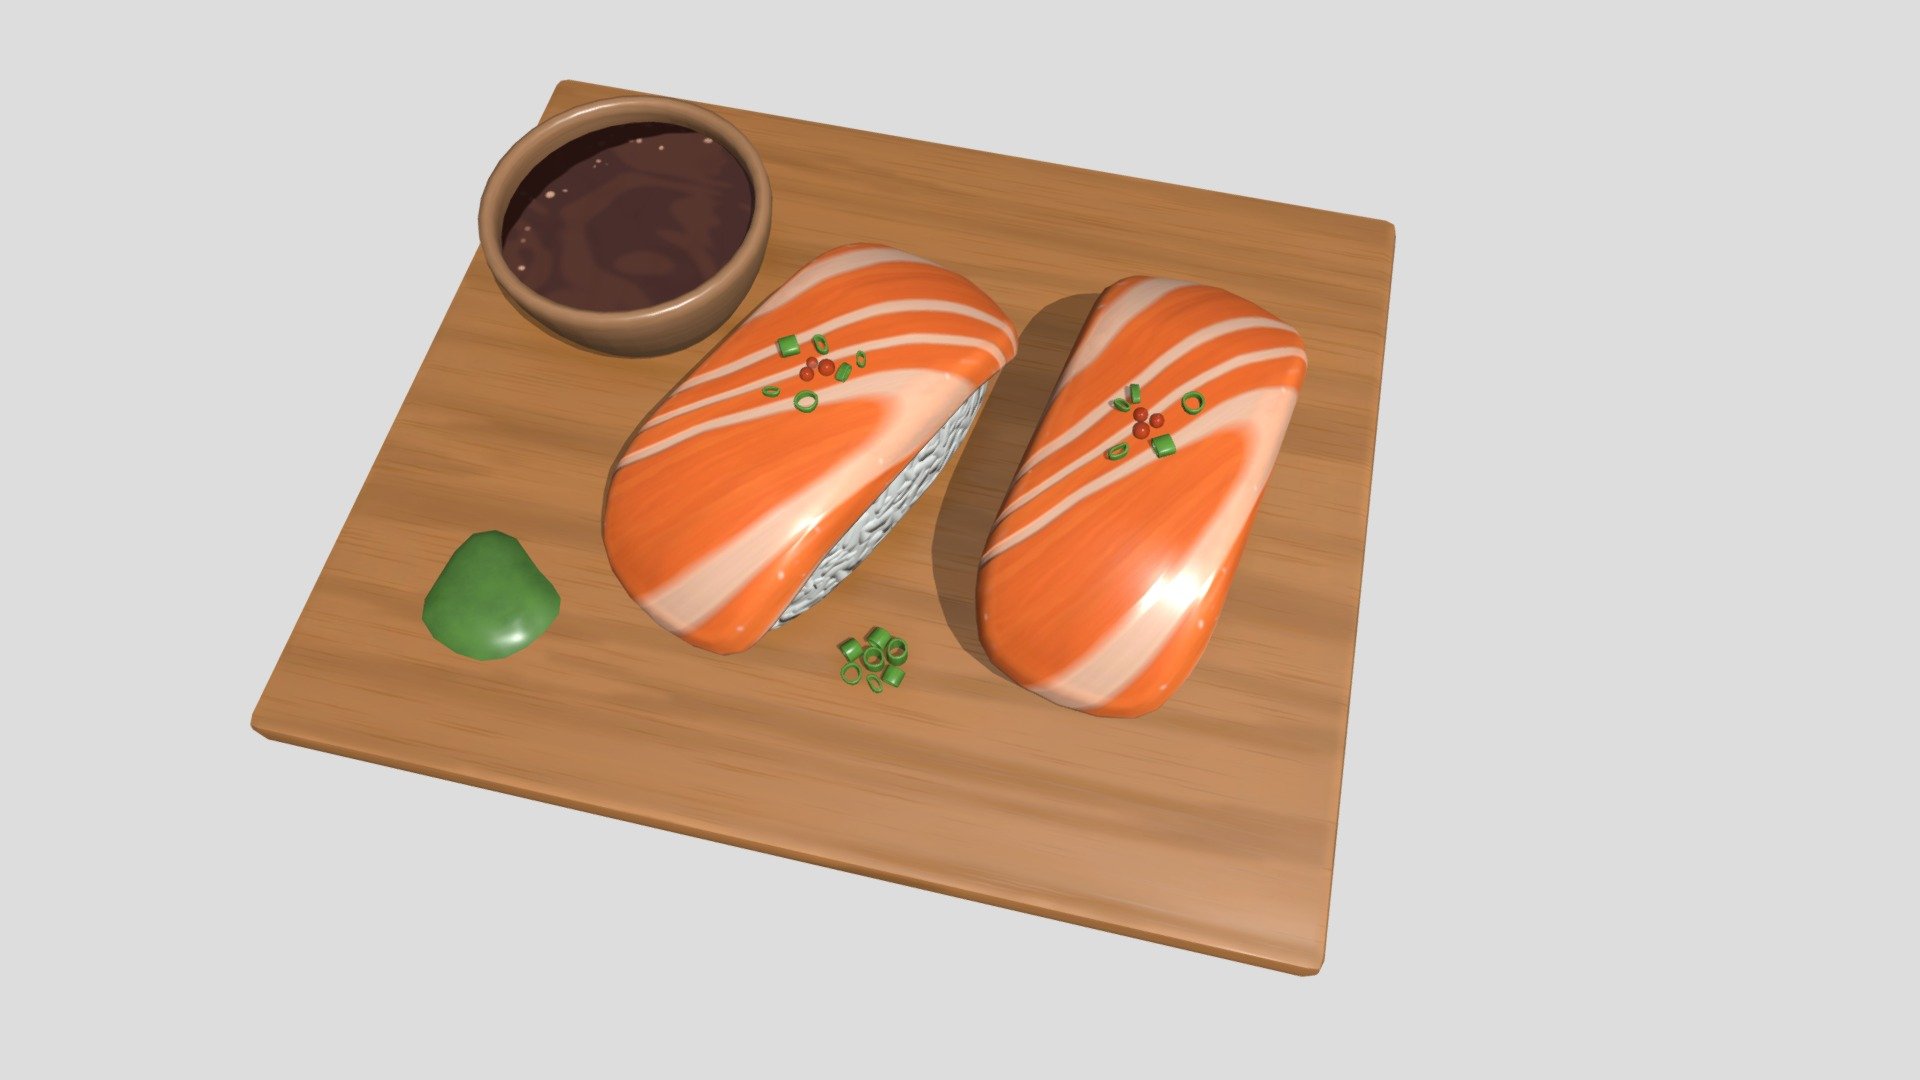 I'm a huge sushi fan myself, so decided to give creating a styalised sushi board a go!

All materials made within substance painter.

Speed paint I used as a reference: https://www.youtube.com/watch?v=H8ioxopCT0E - Sushi board - 3D model by ellejm 3d model